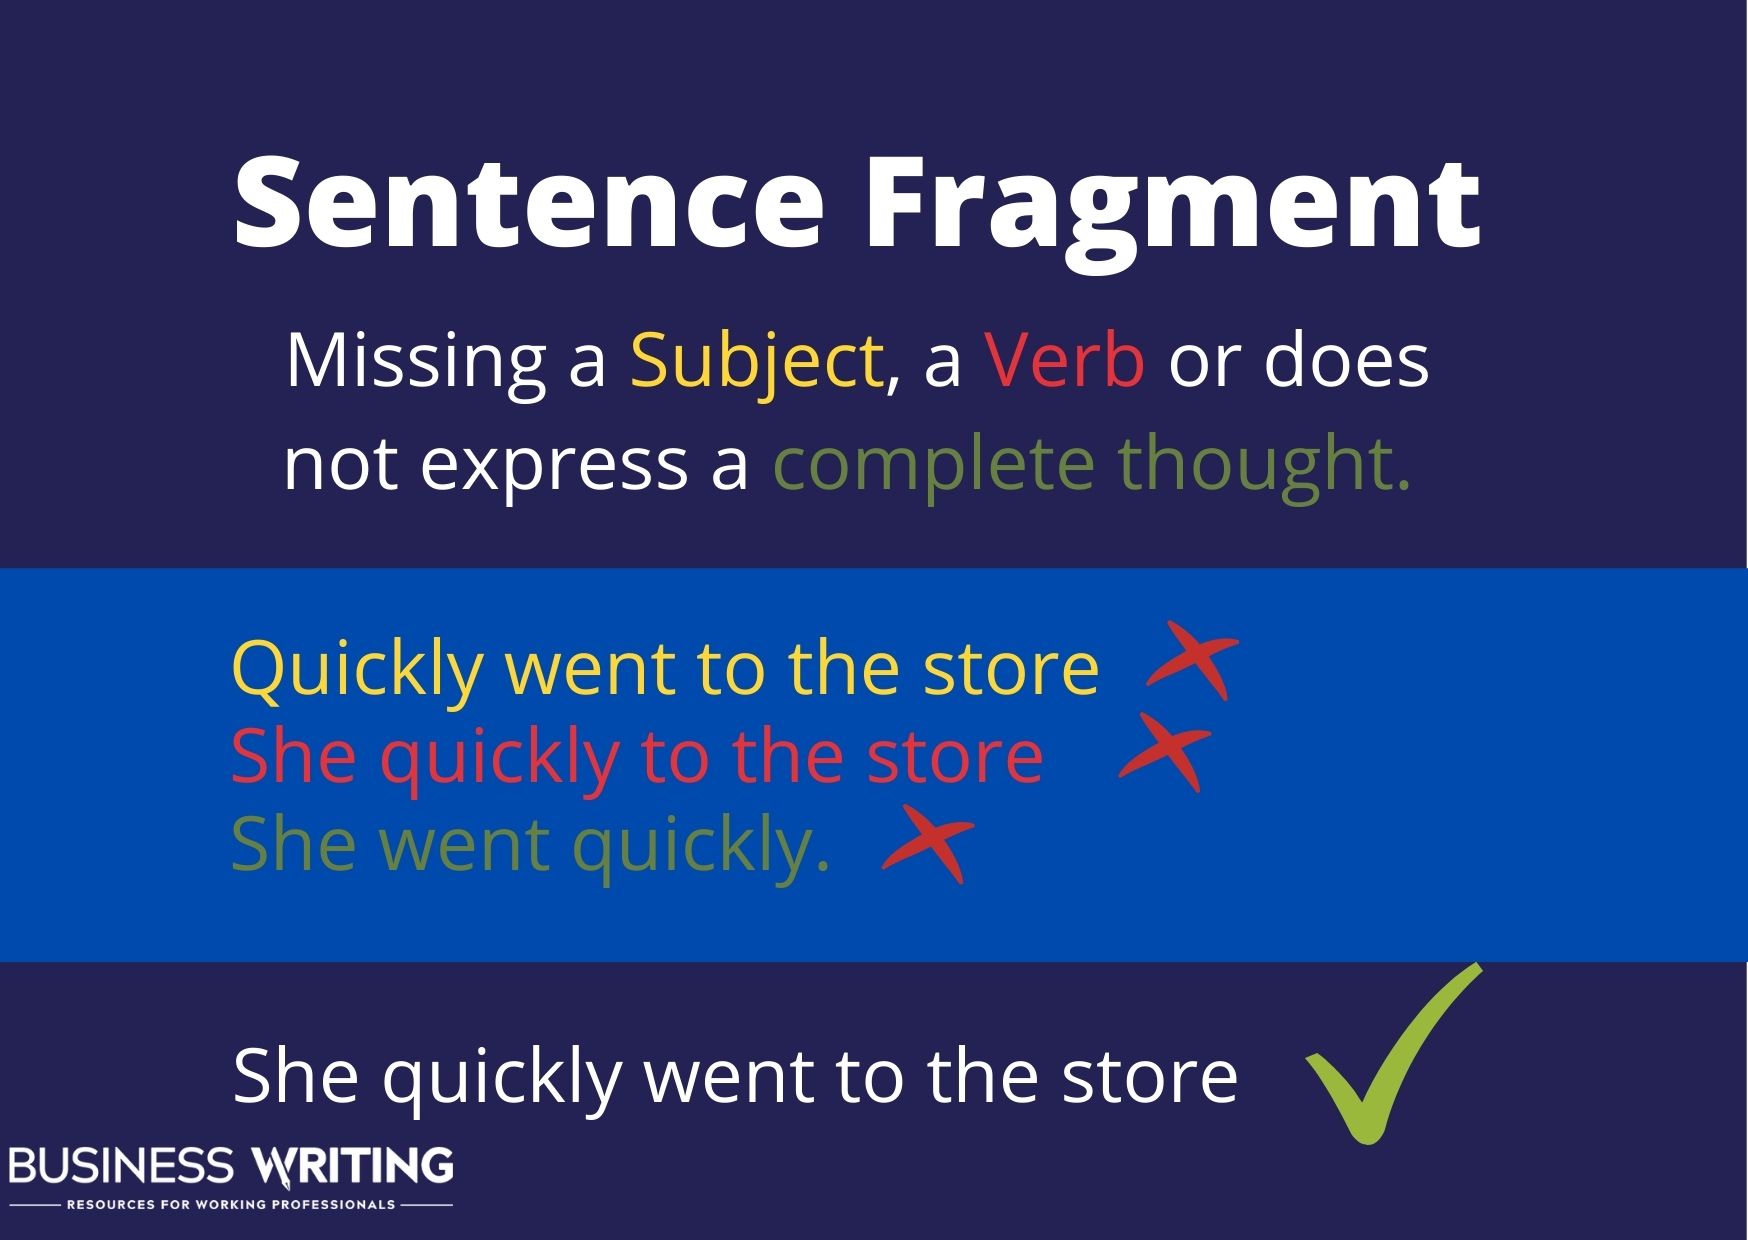 Definition of a Sentence Fragment: a sentence that is missing a noun, a verb or does not express a complete thought